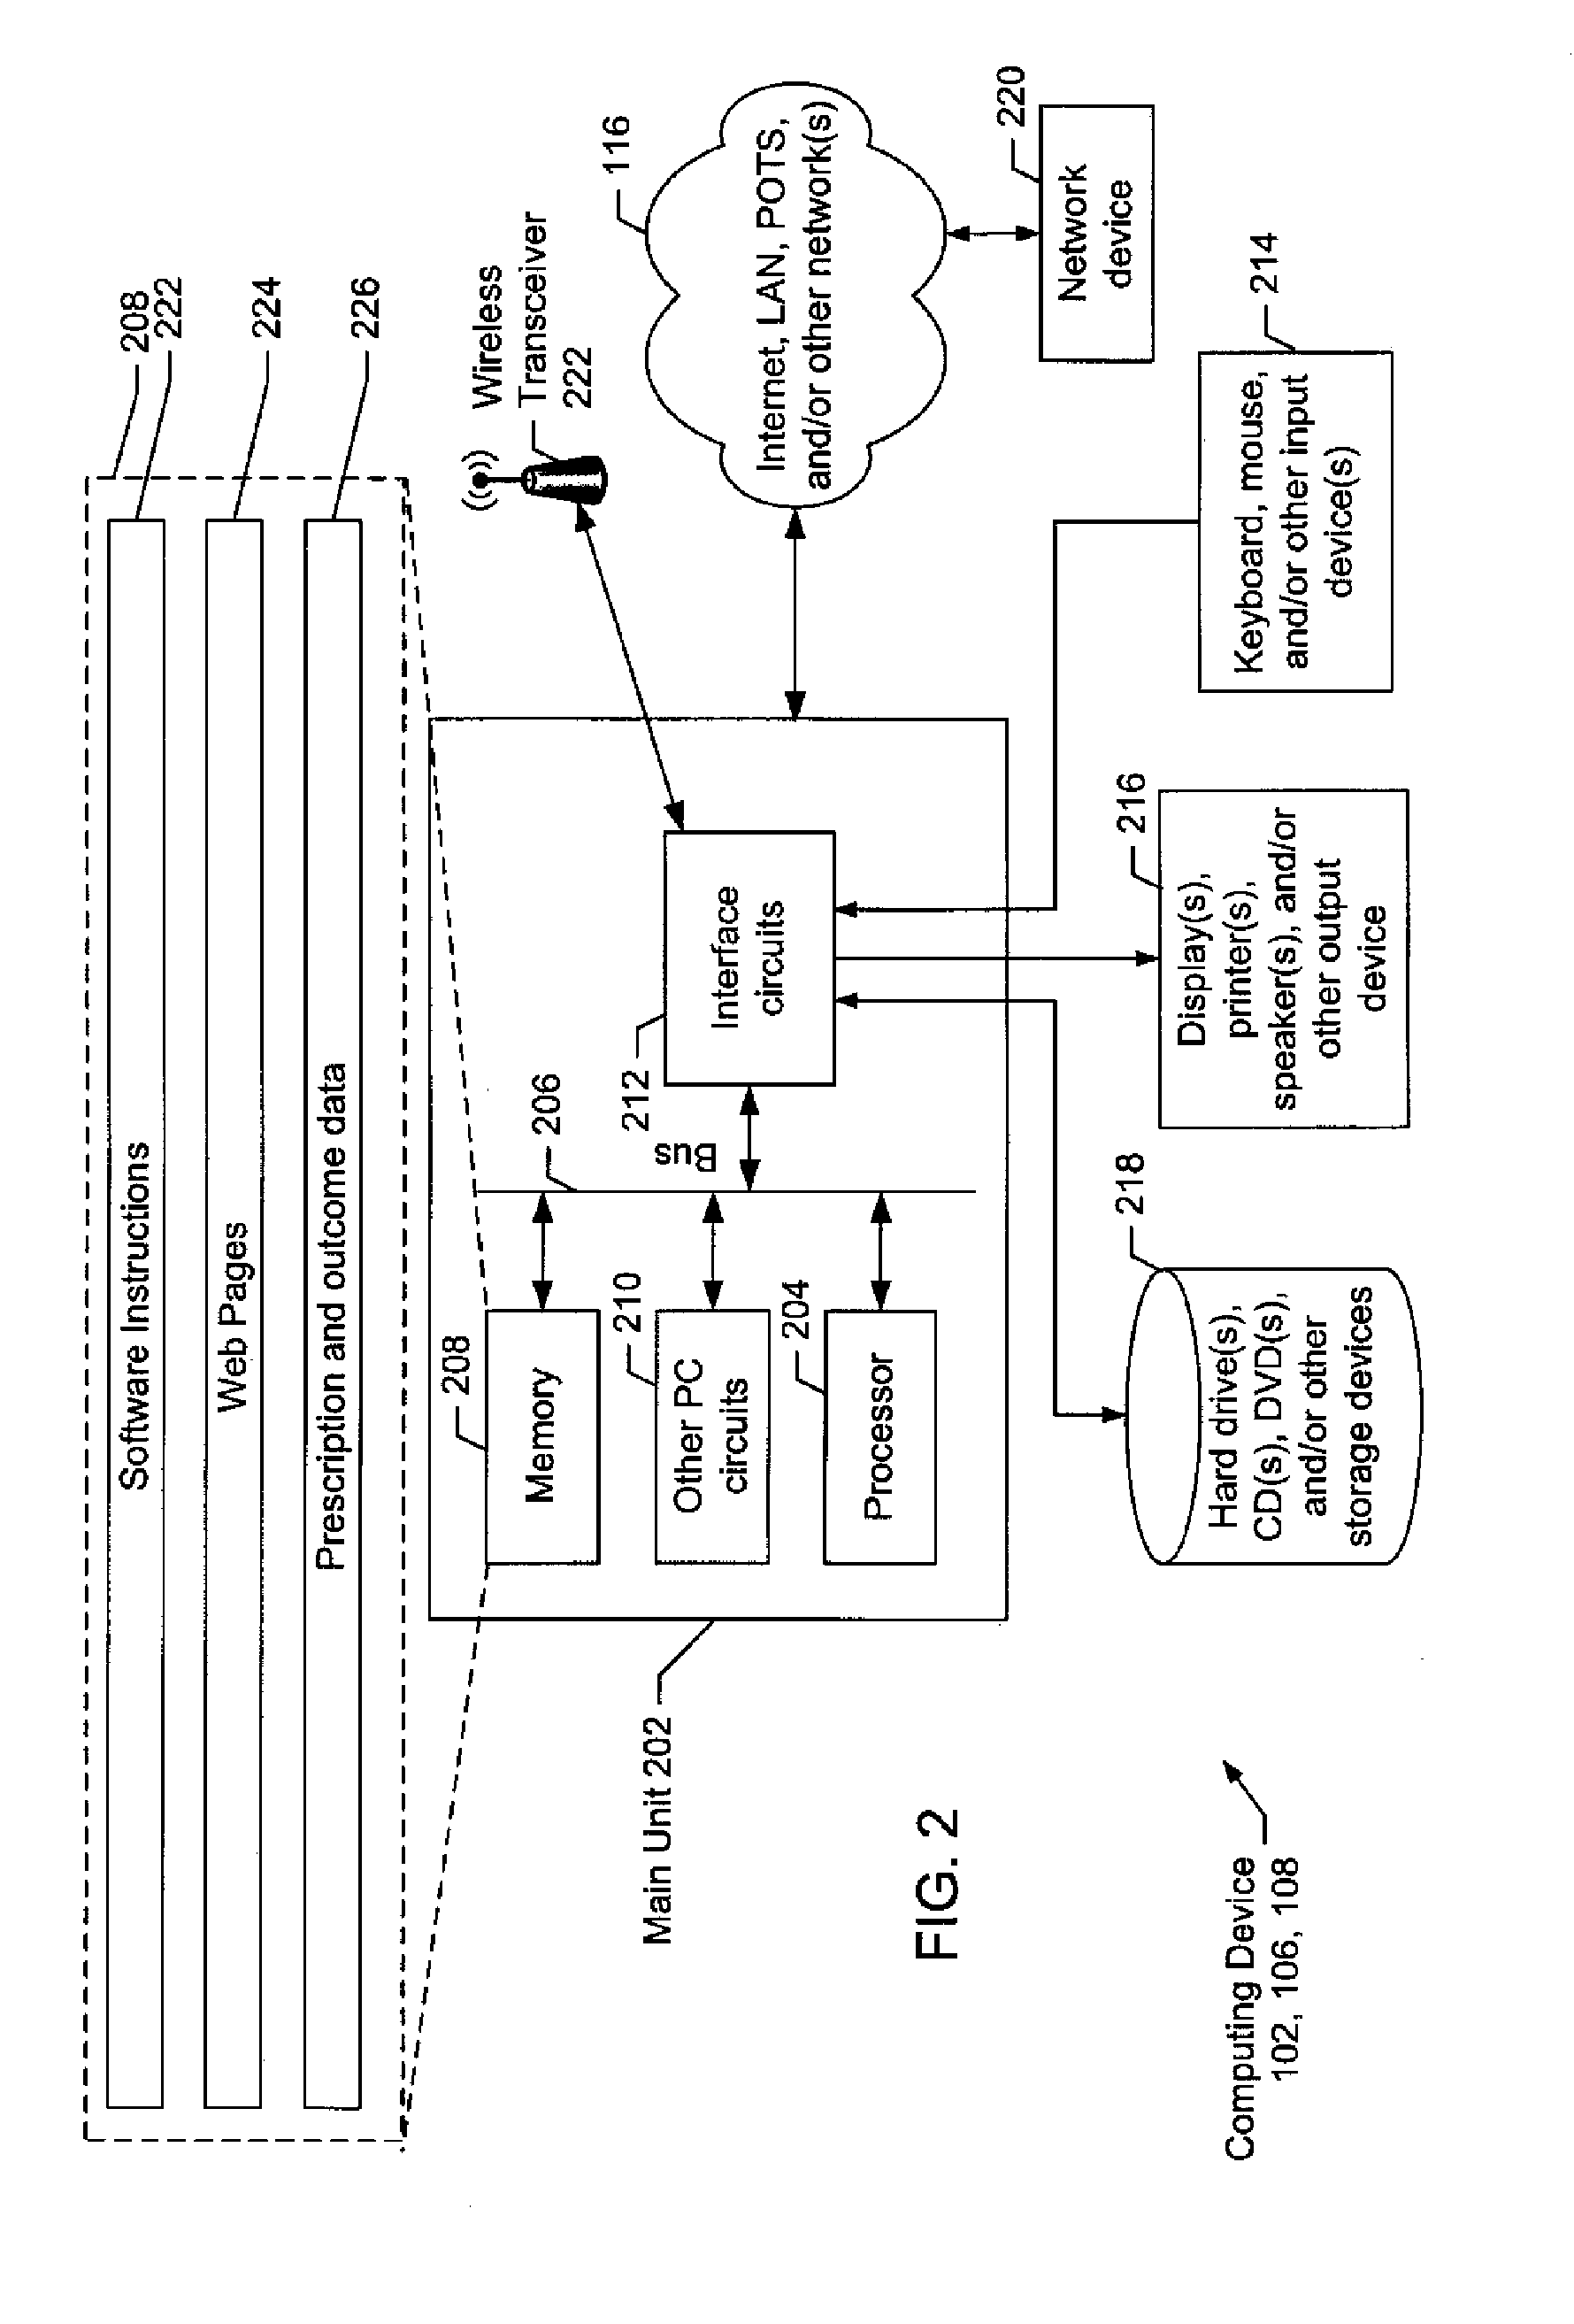 Methods and apparatus for improving healthcare